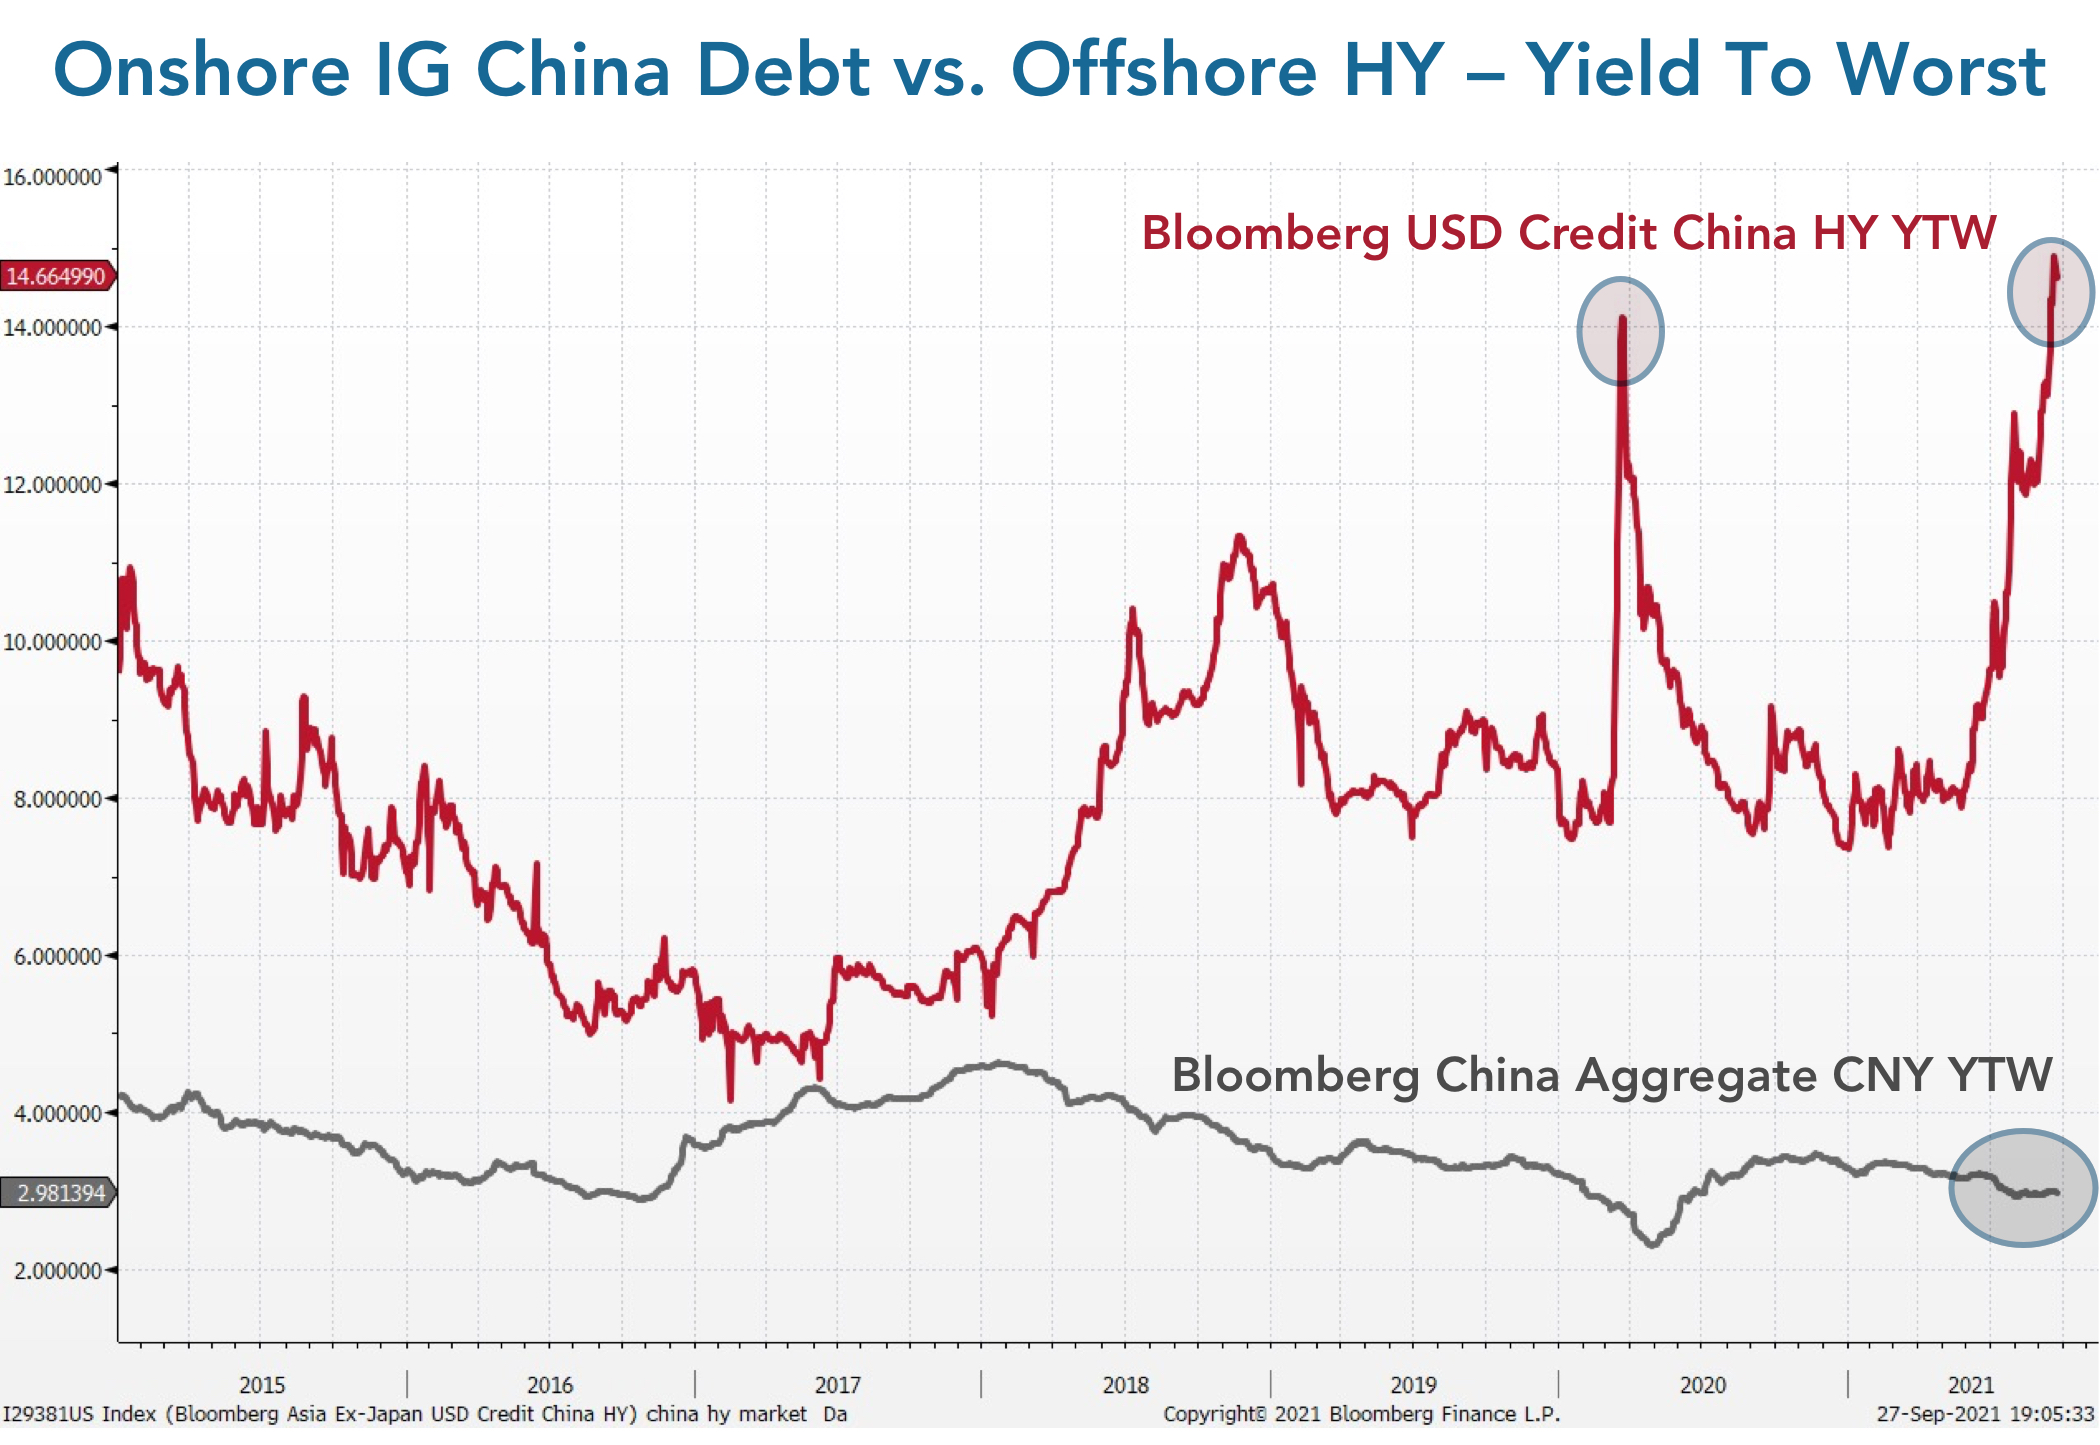 Onshore IG China Debt vs. Offshore HY - Yield to Worst